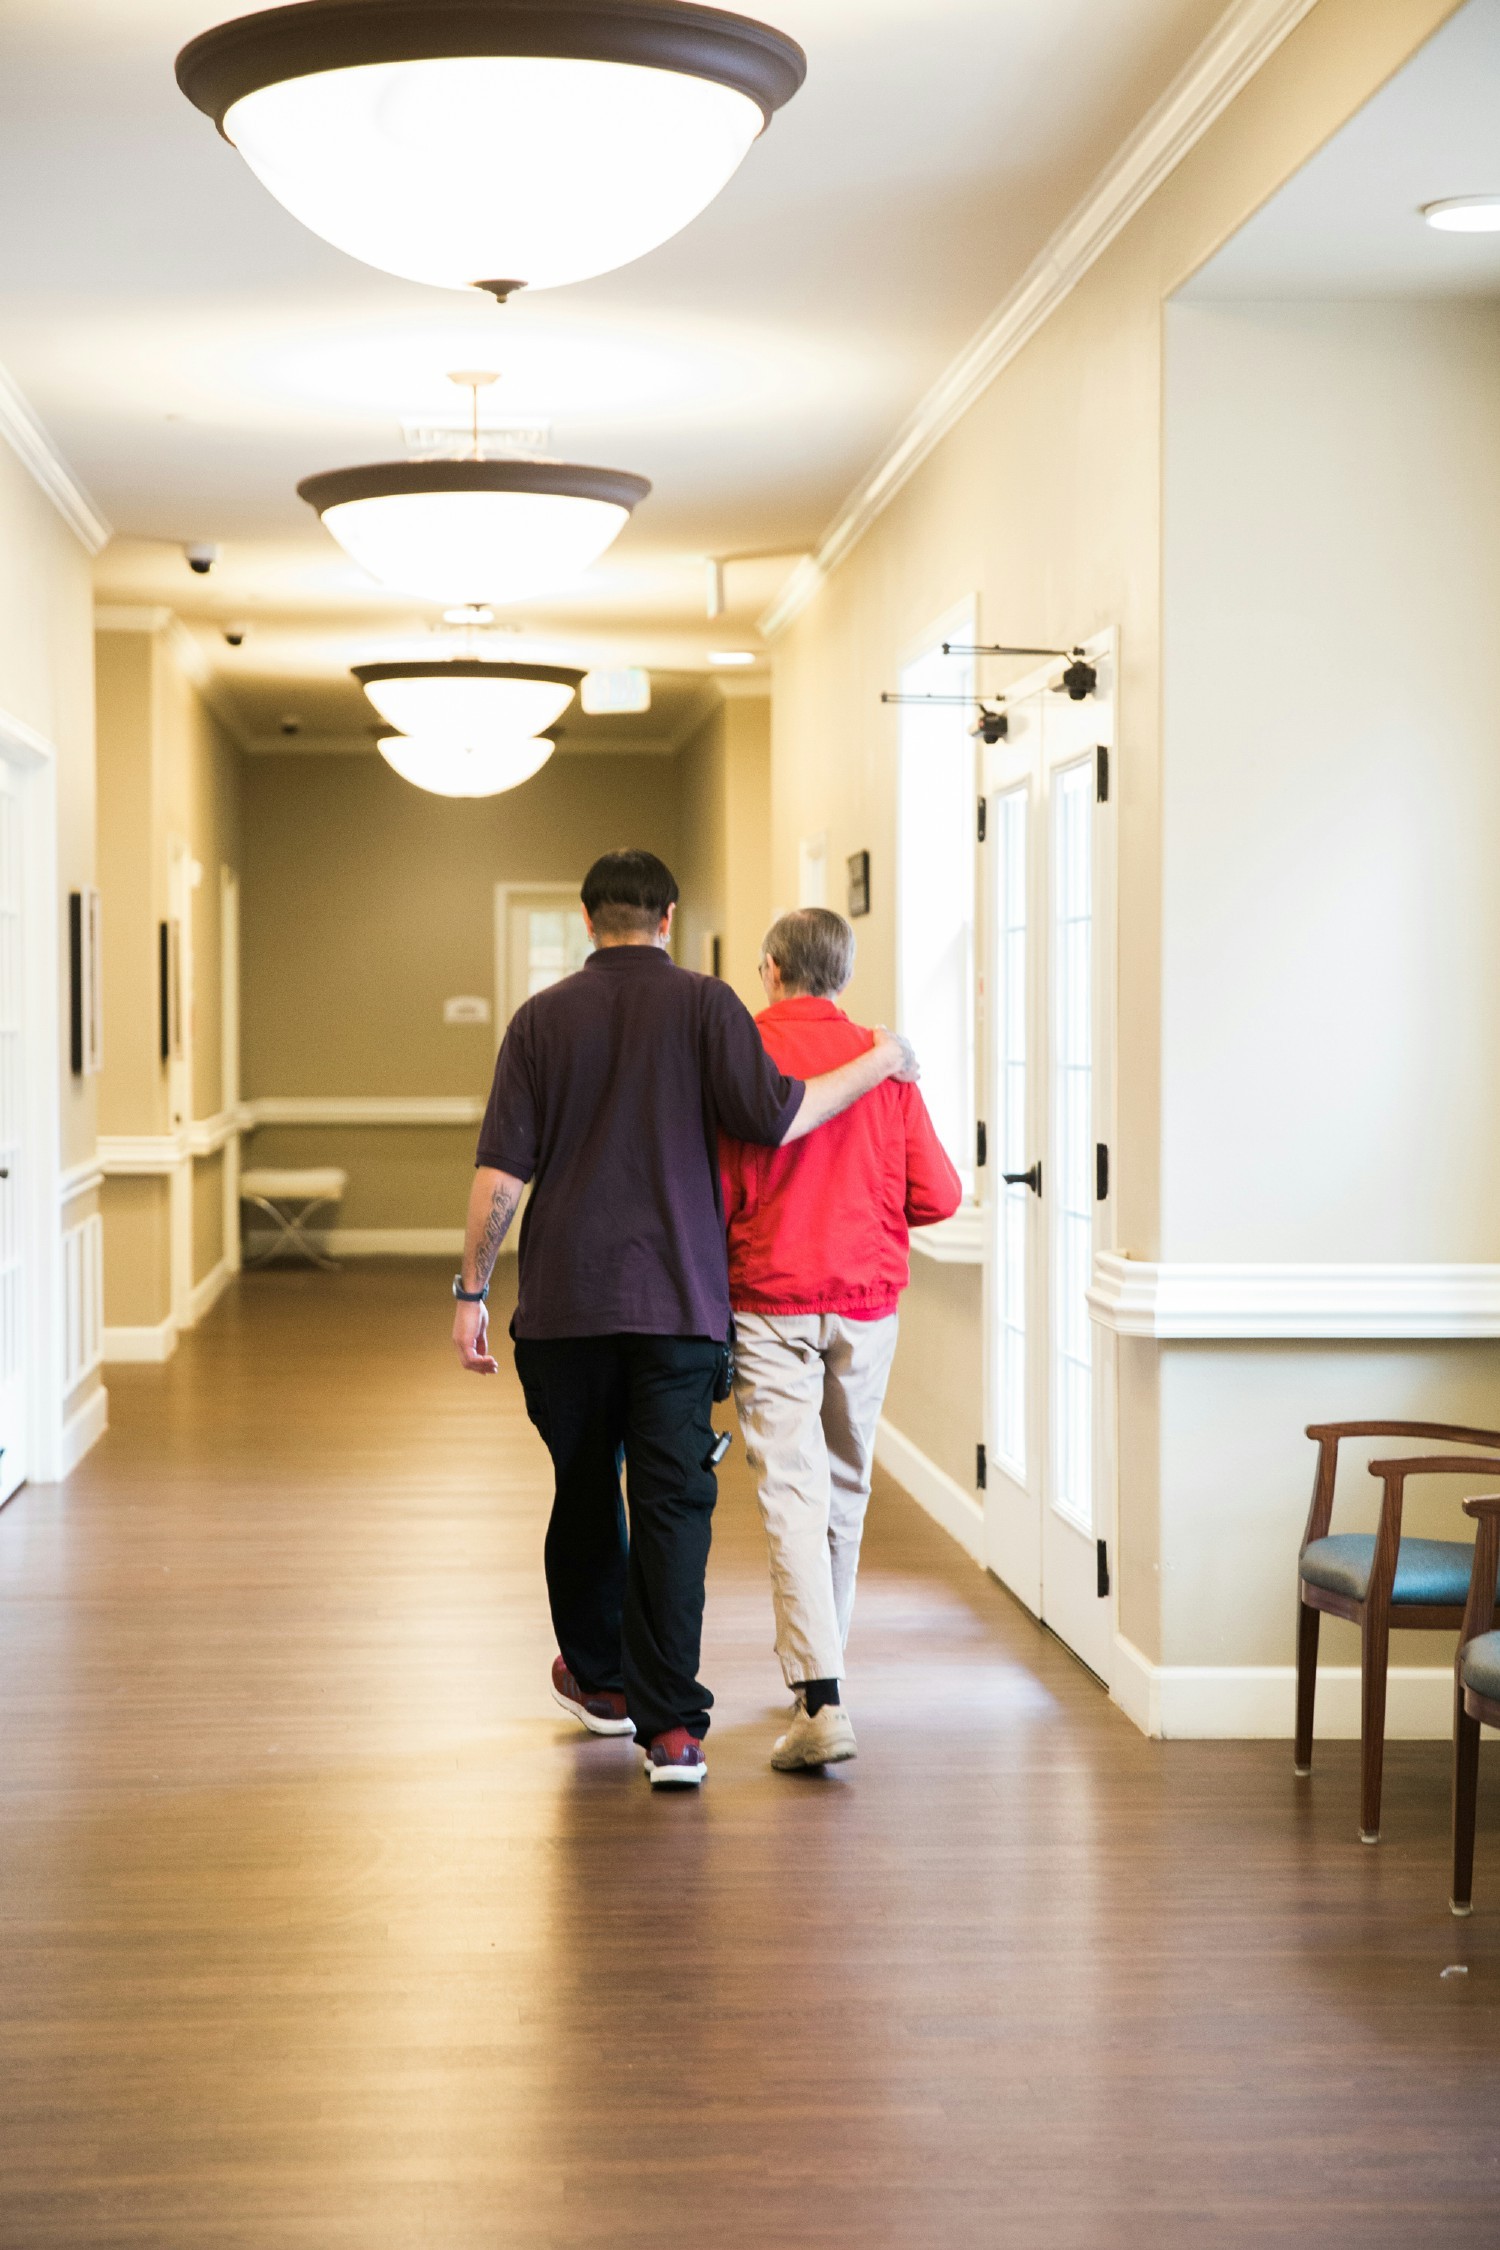 A quiet moment between a caregiver and resident